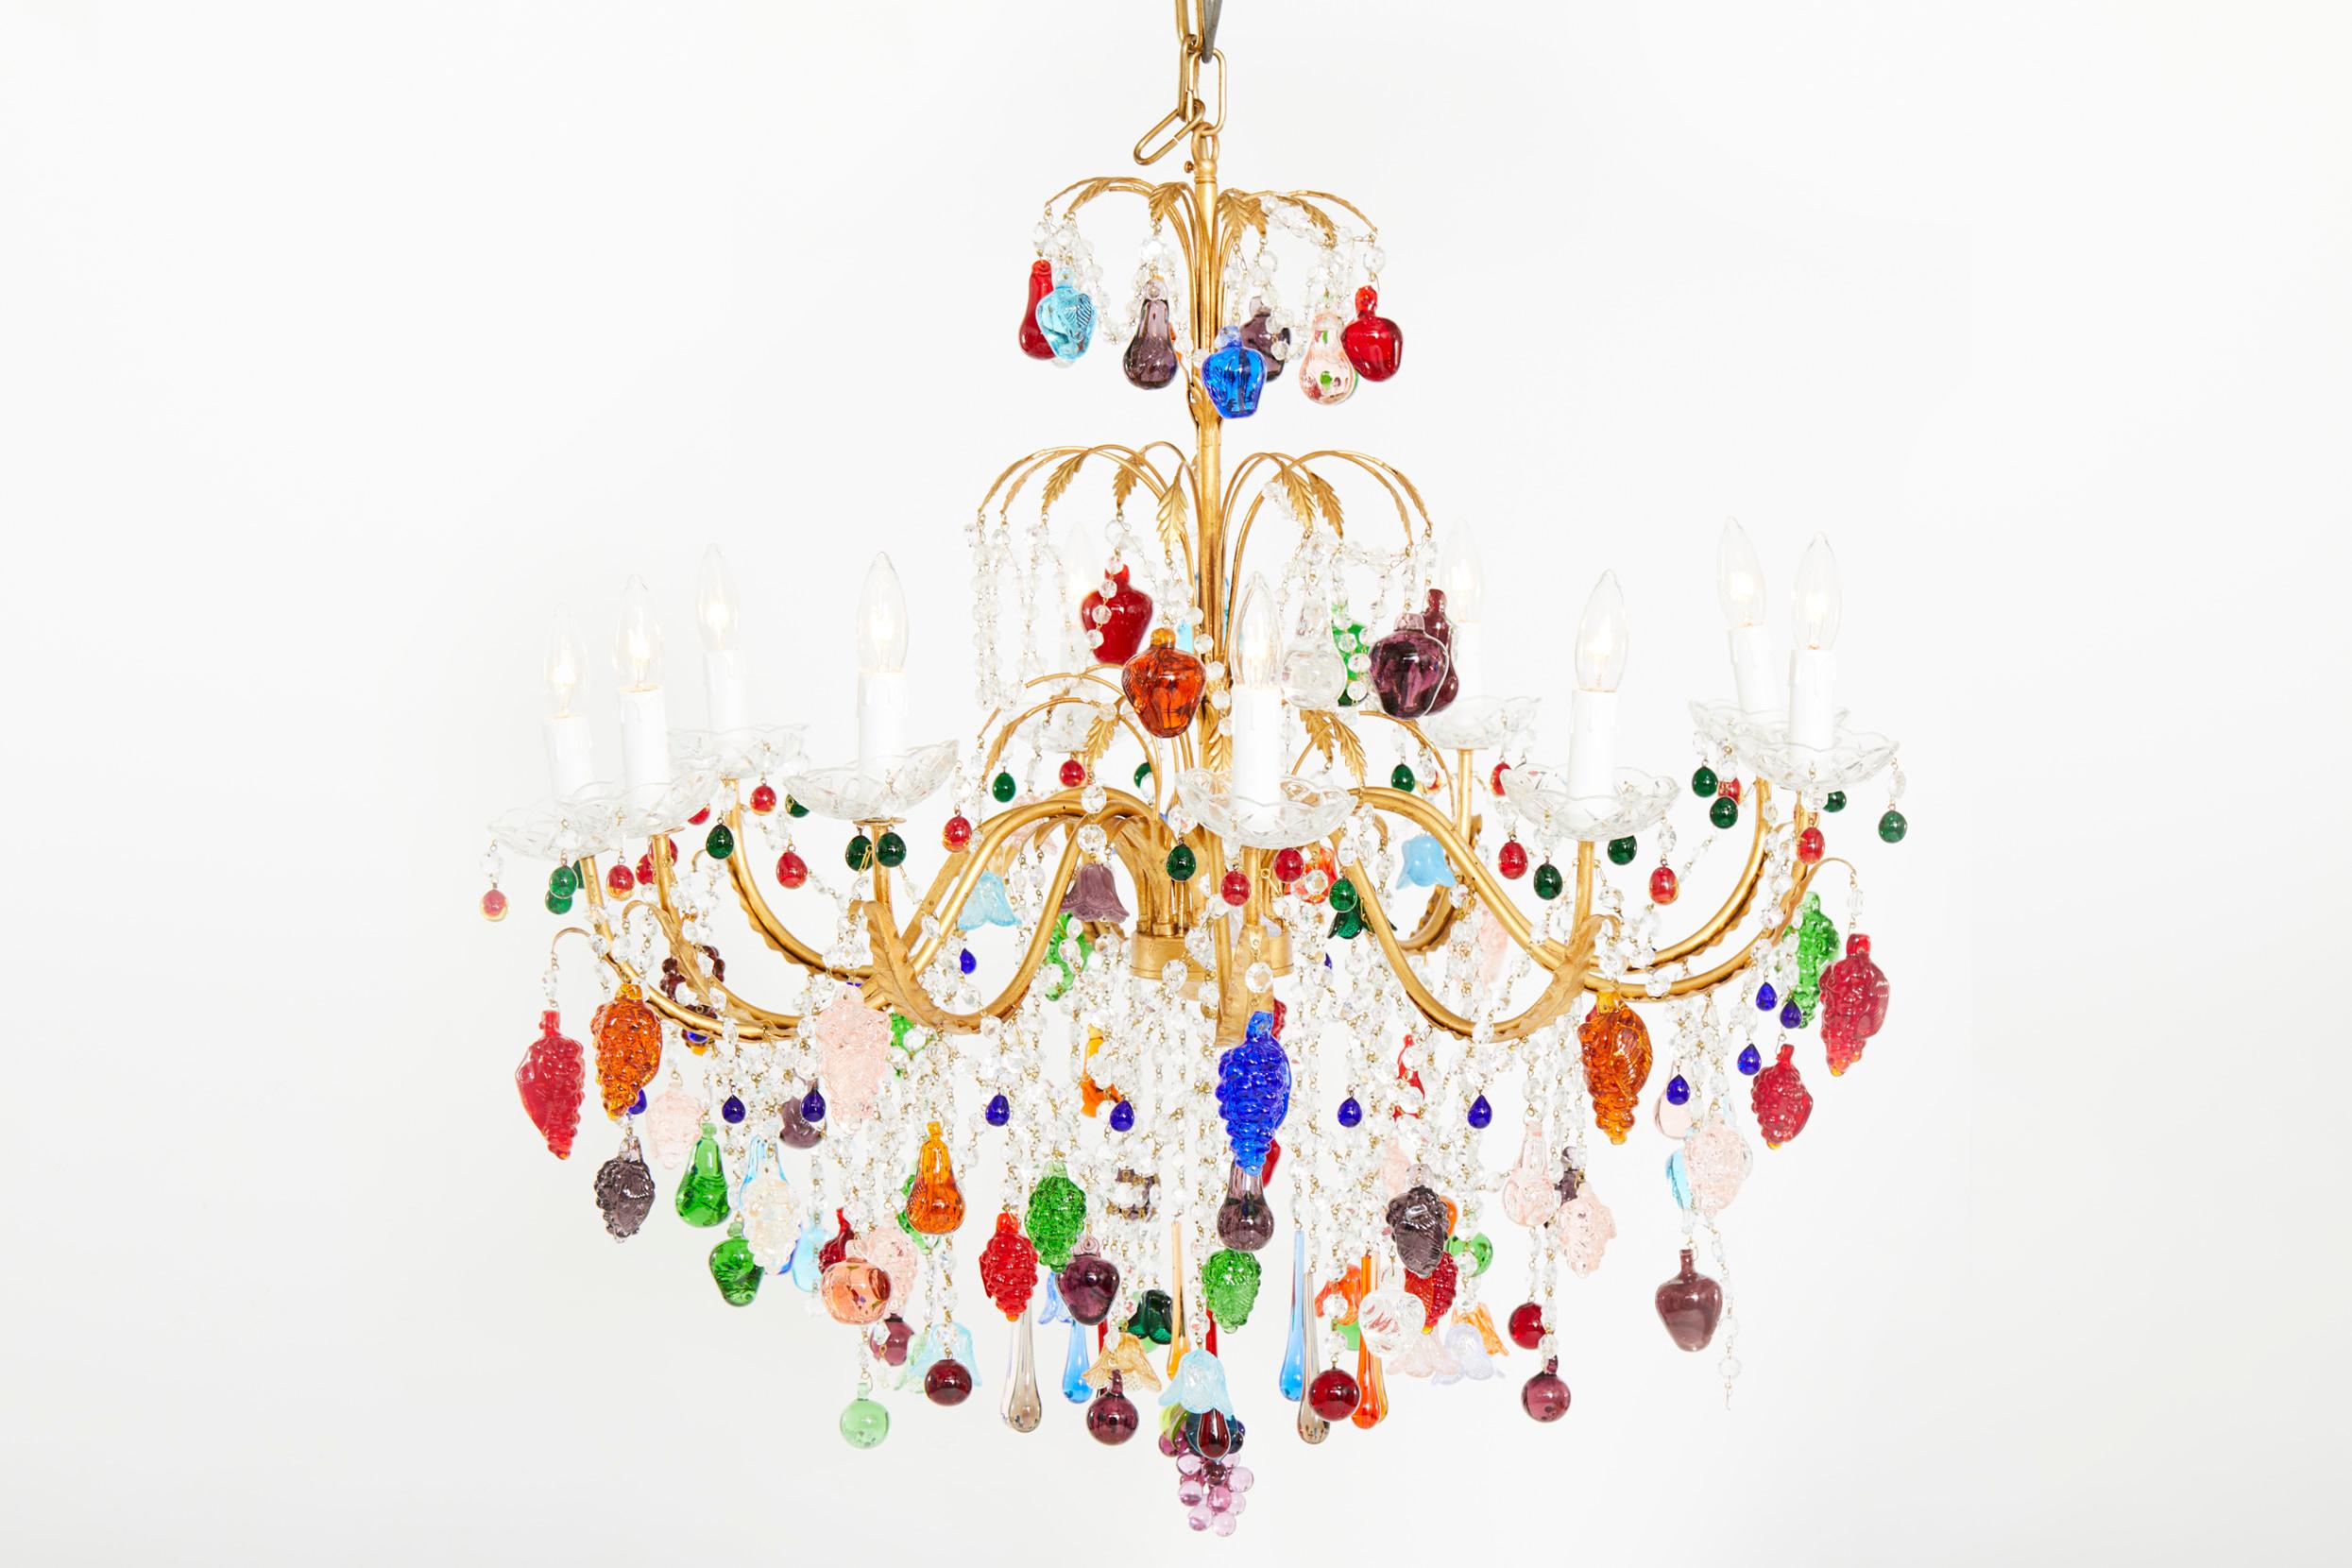 Exquisite colored crystal fruits design details with gilt brass frame ten lights hanging chandelier.
The chandelier is in great working condition. Minor wear consistent with age / use. Rewired for US use. No special light bulbs required. The